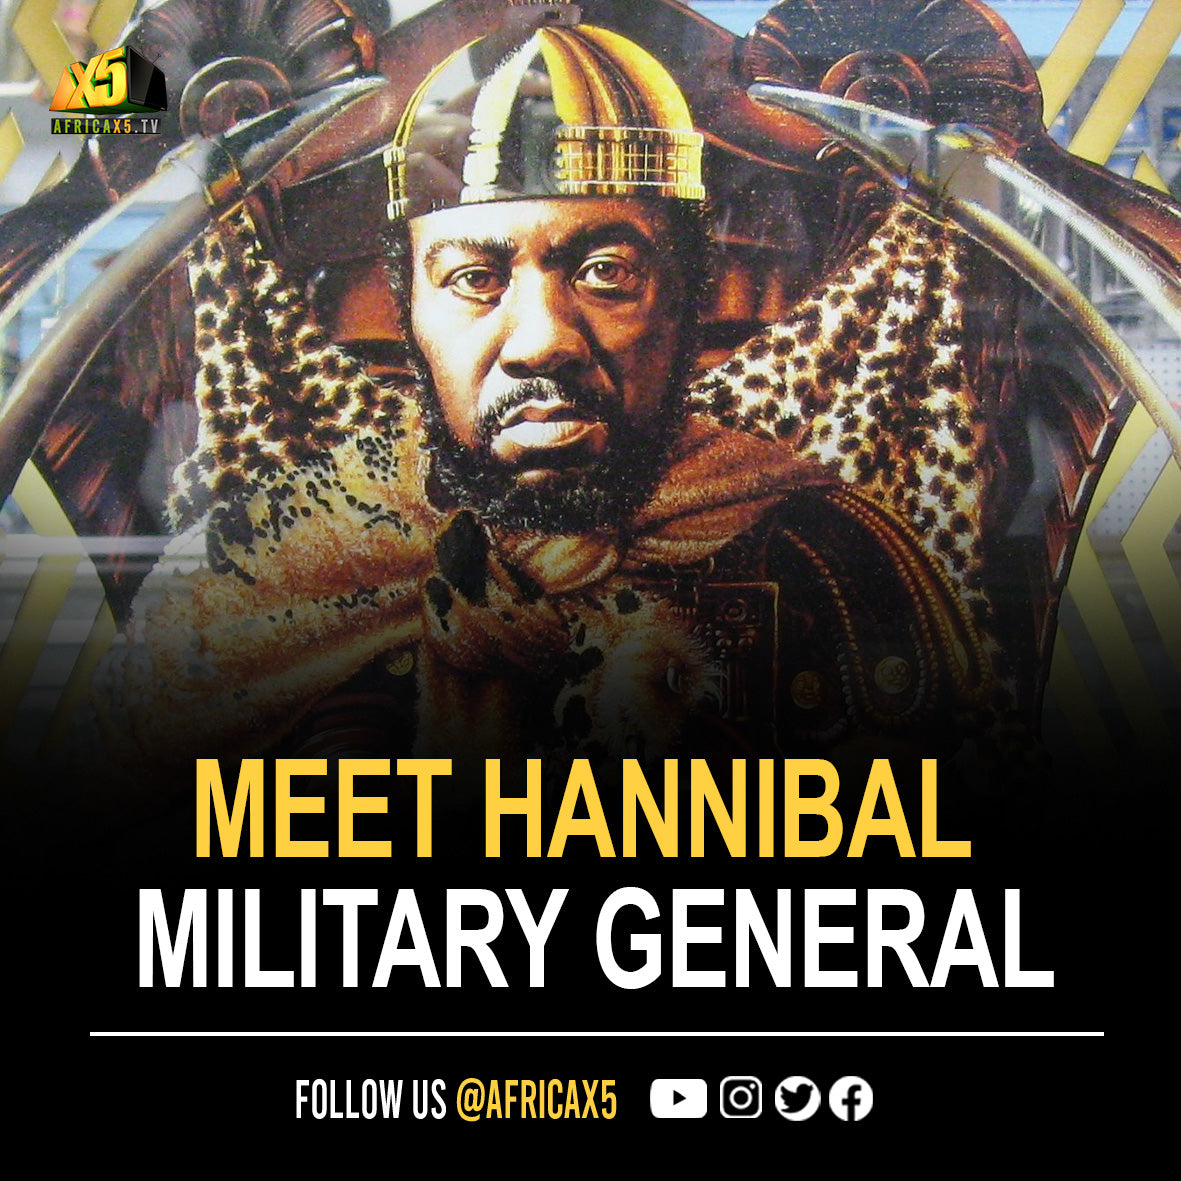 Meet Hannibal, The Greatest African Military General Who Conquered Europe